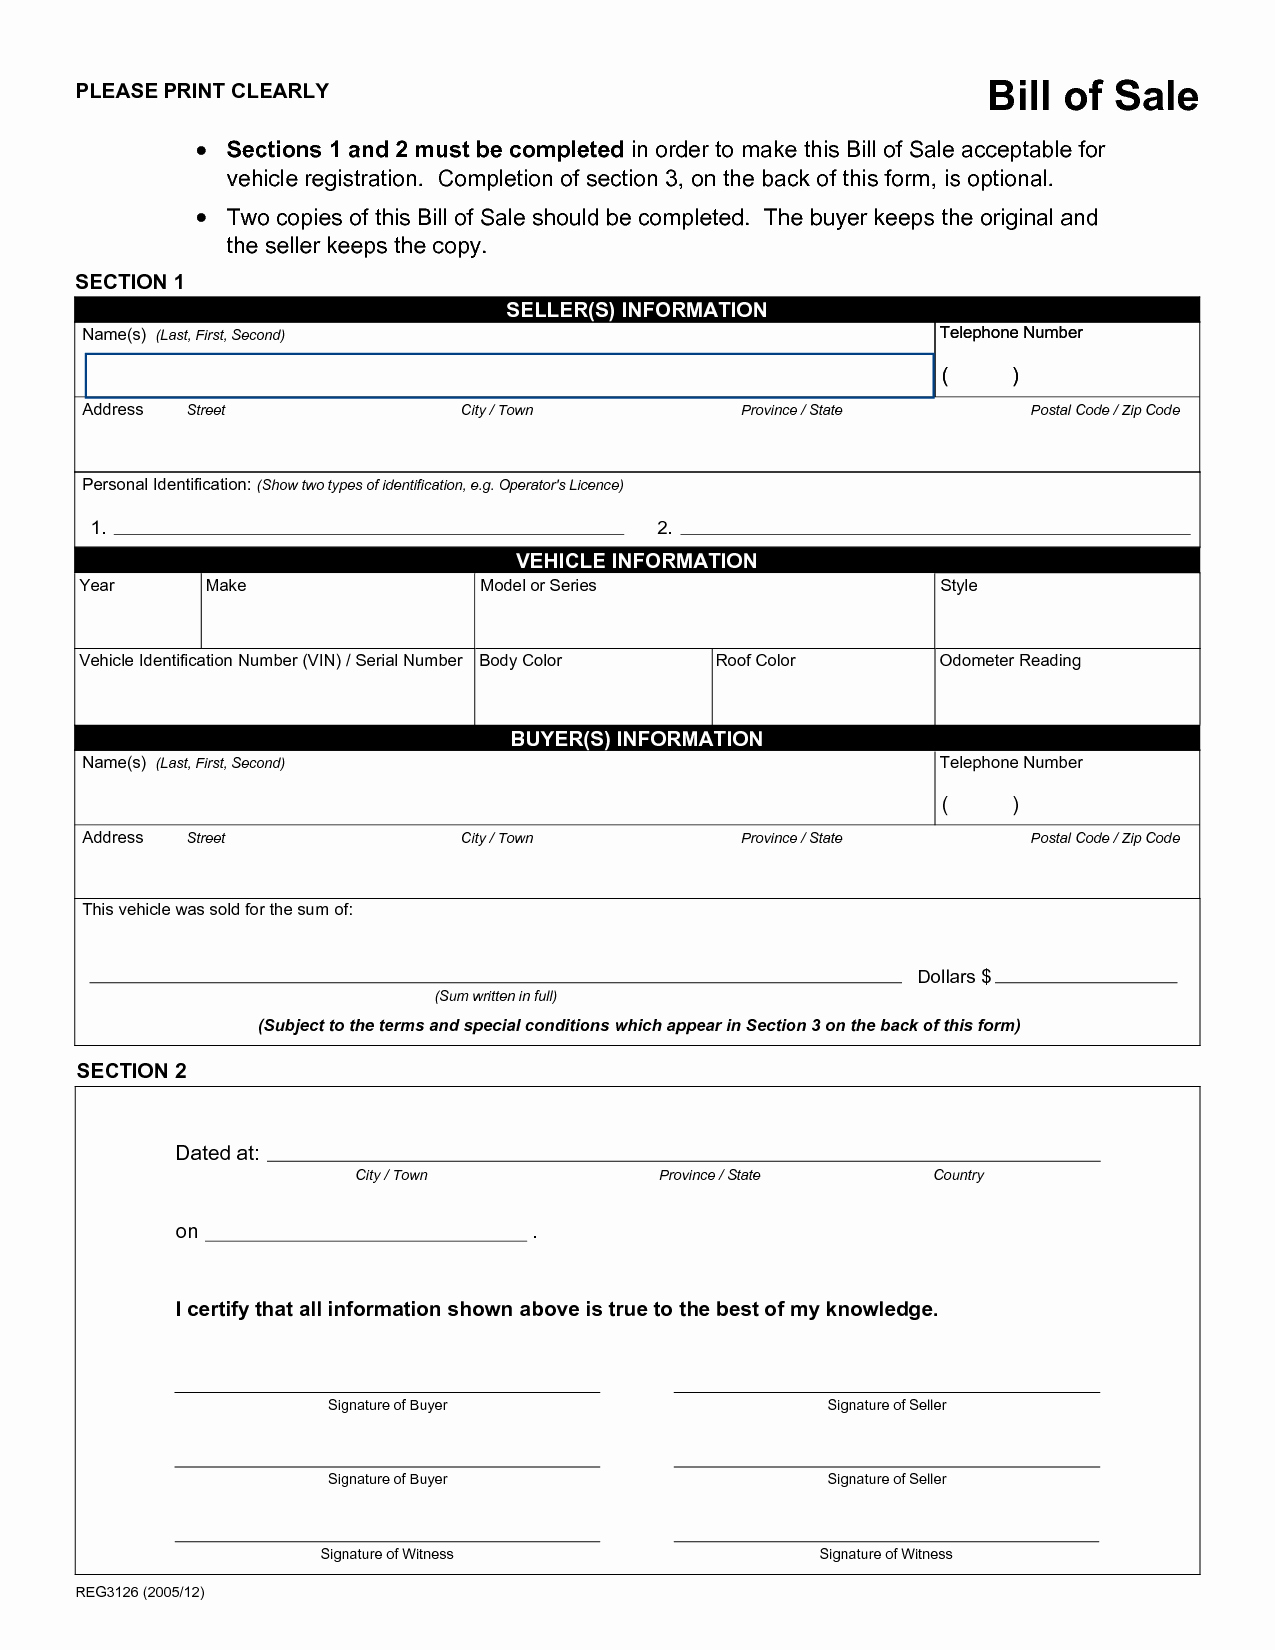 Bill Of Sale format Sample Beautiful Free Printable Rv Bill Of Sale form form Generic